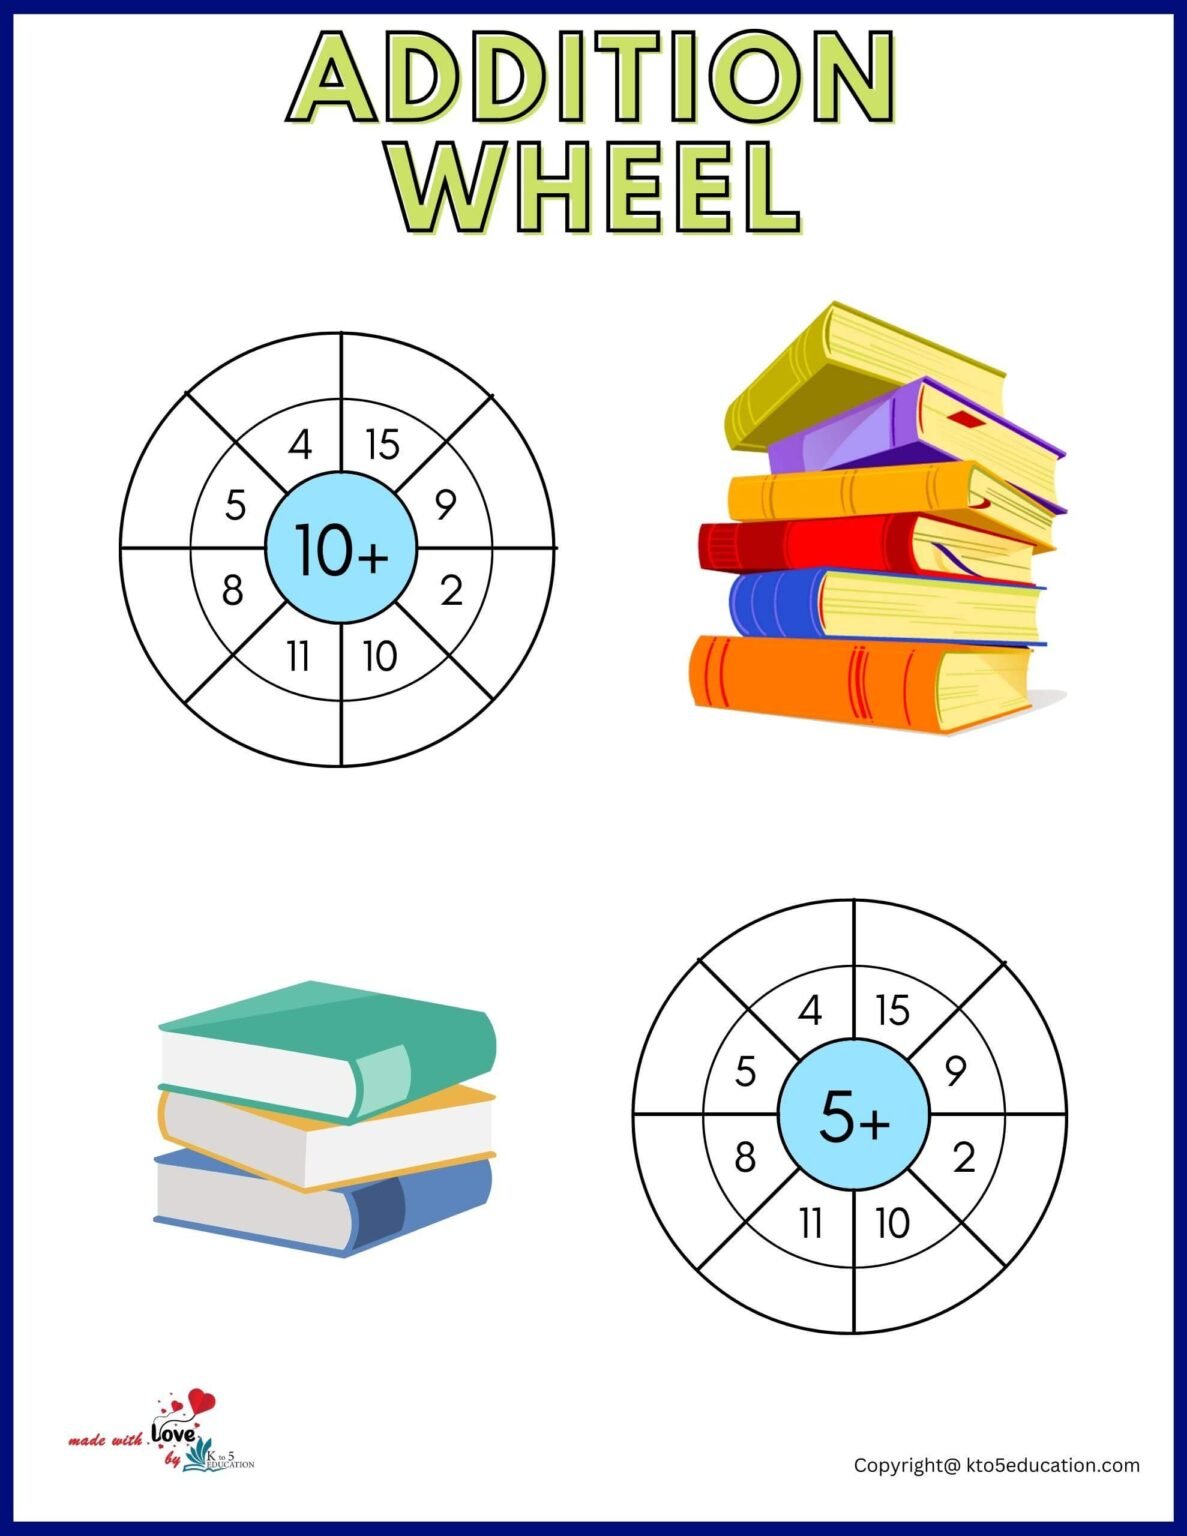 free-addition-wheel-worksheets-for-kids-free-download